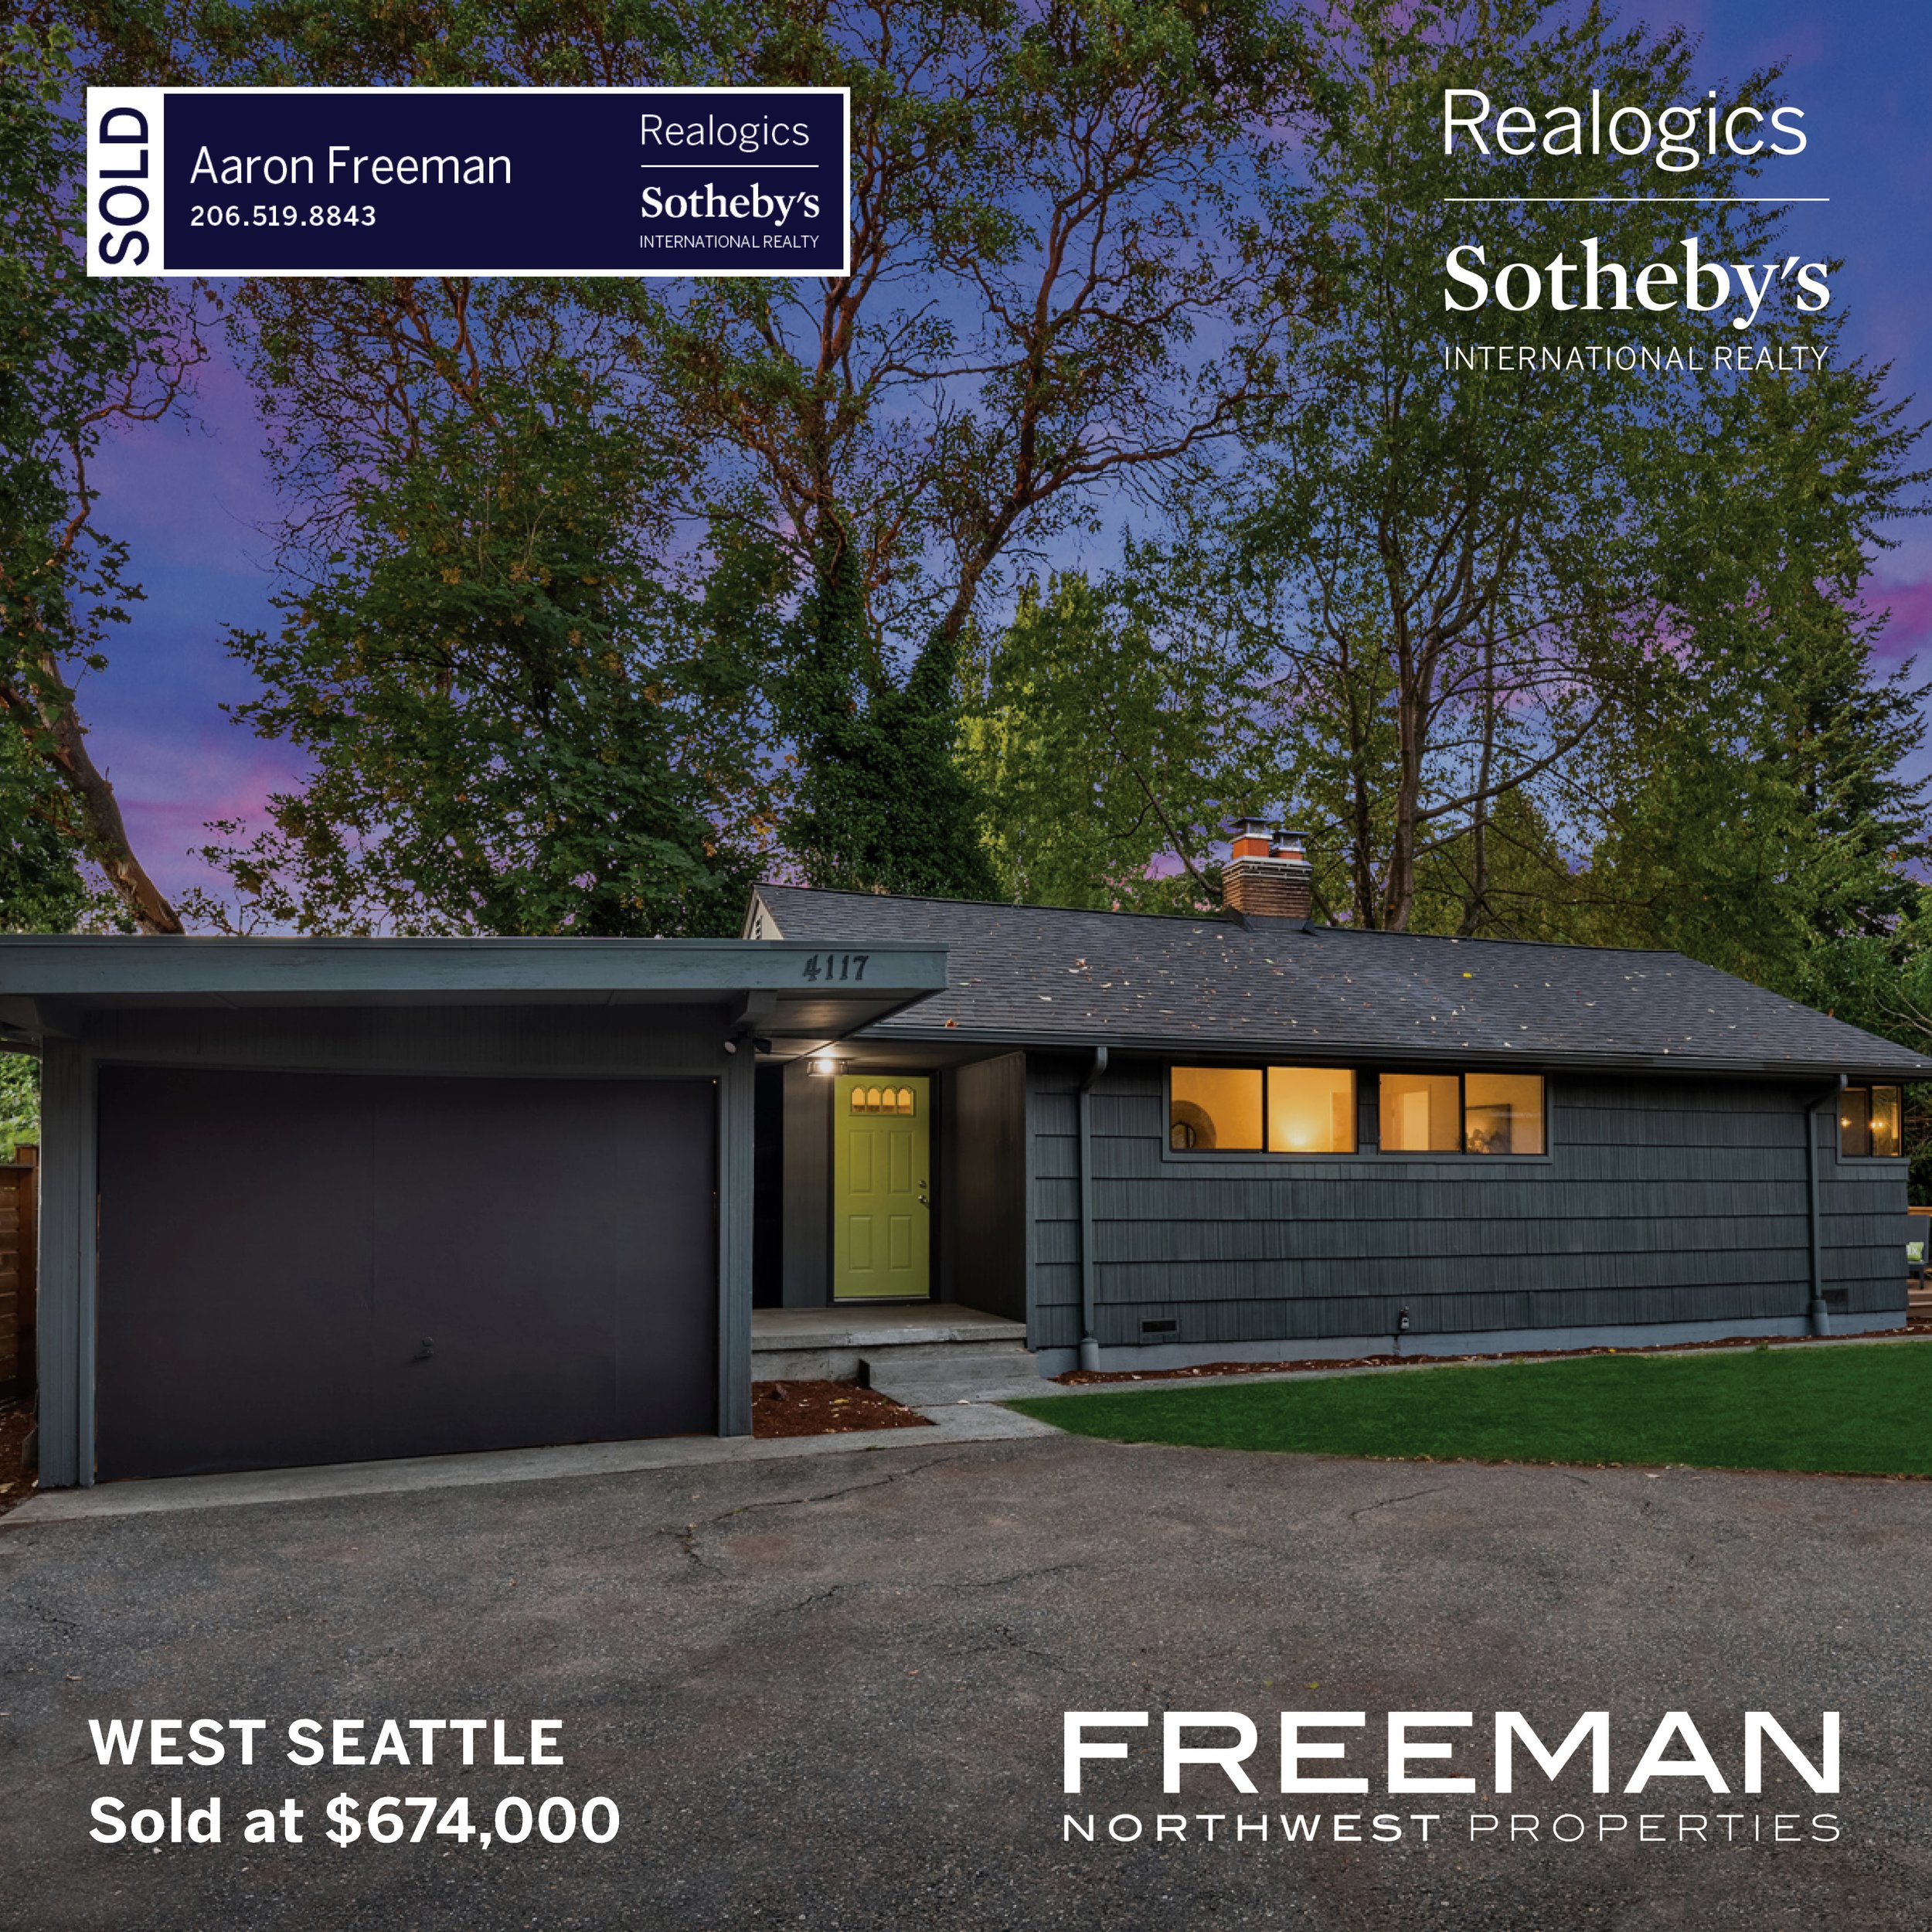 03_West_Seattle_Sold_Graphic.jpg